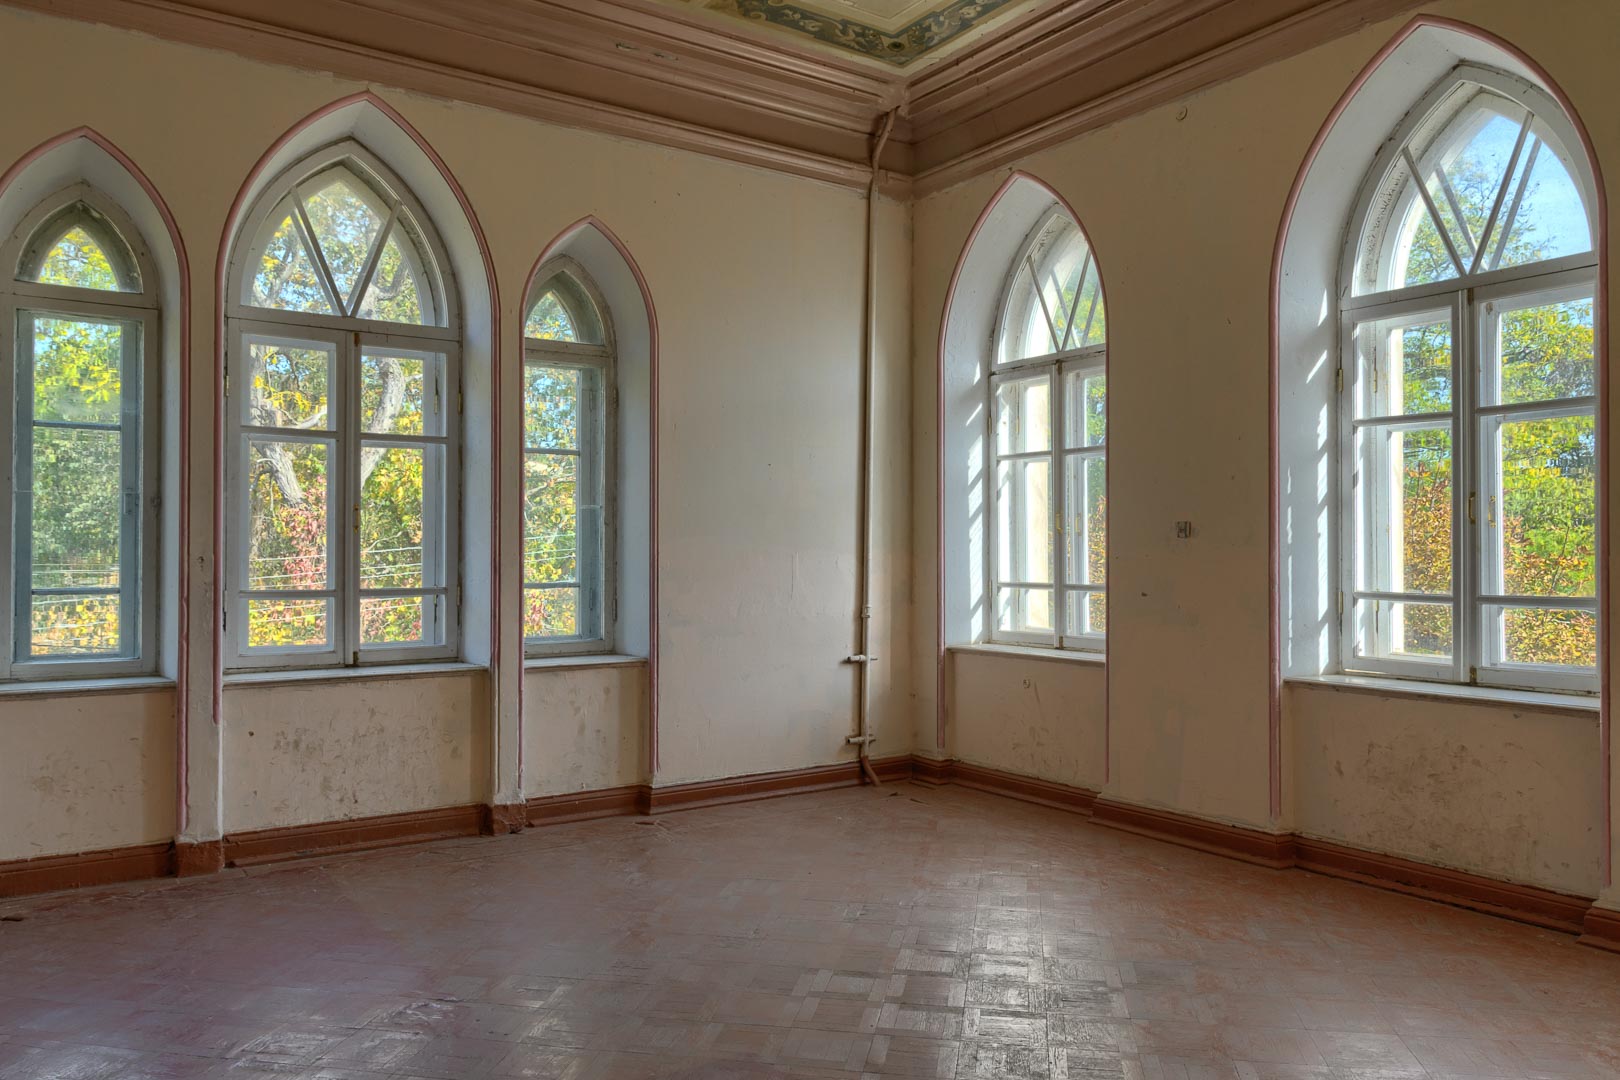 Backplate • ID: 13283 • HDRI Haven - Palace Room With Worn Floor